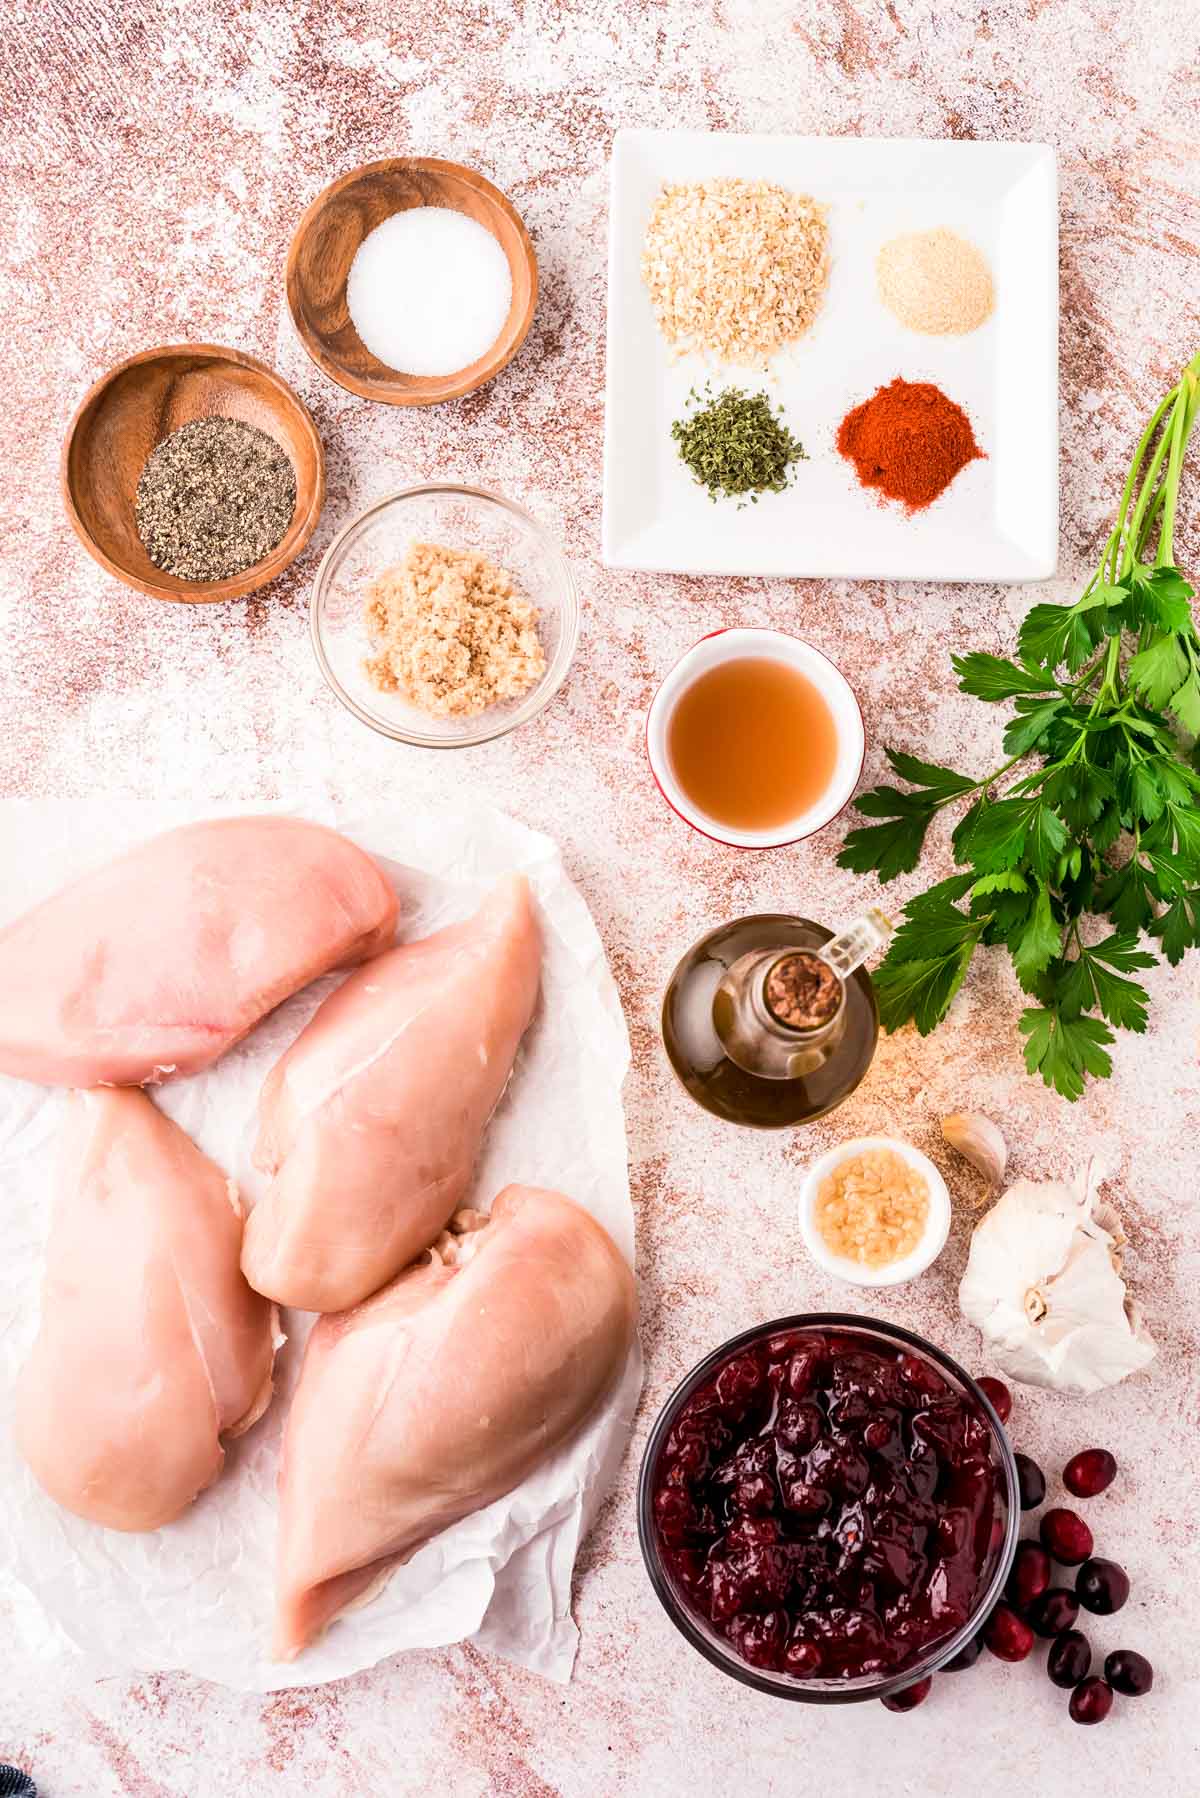 Ingredients to make cranberry chicken prepared on a table.